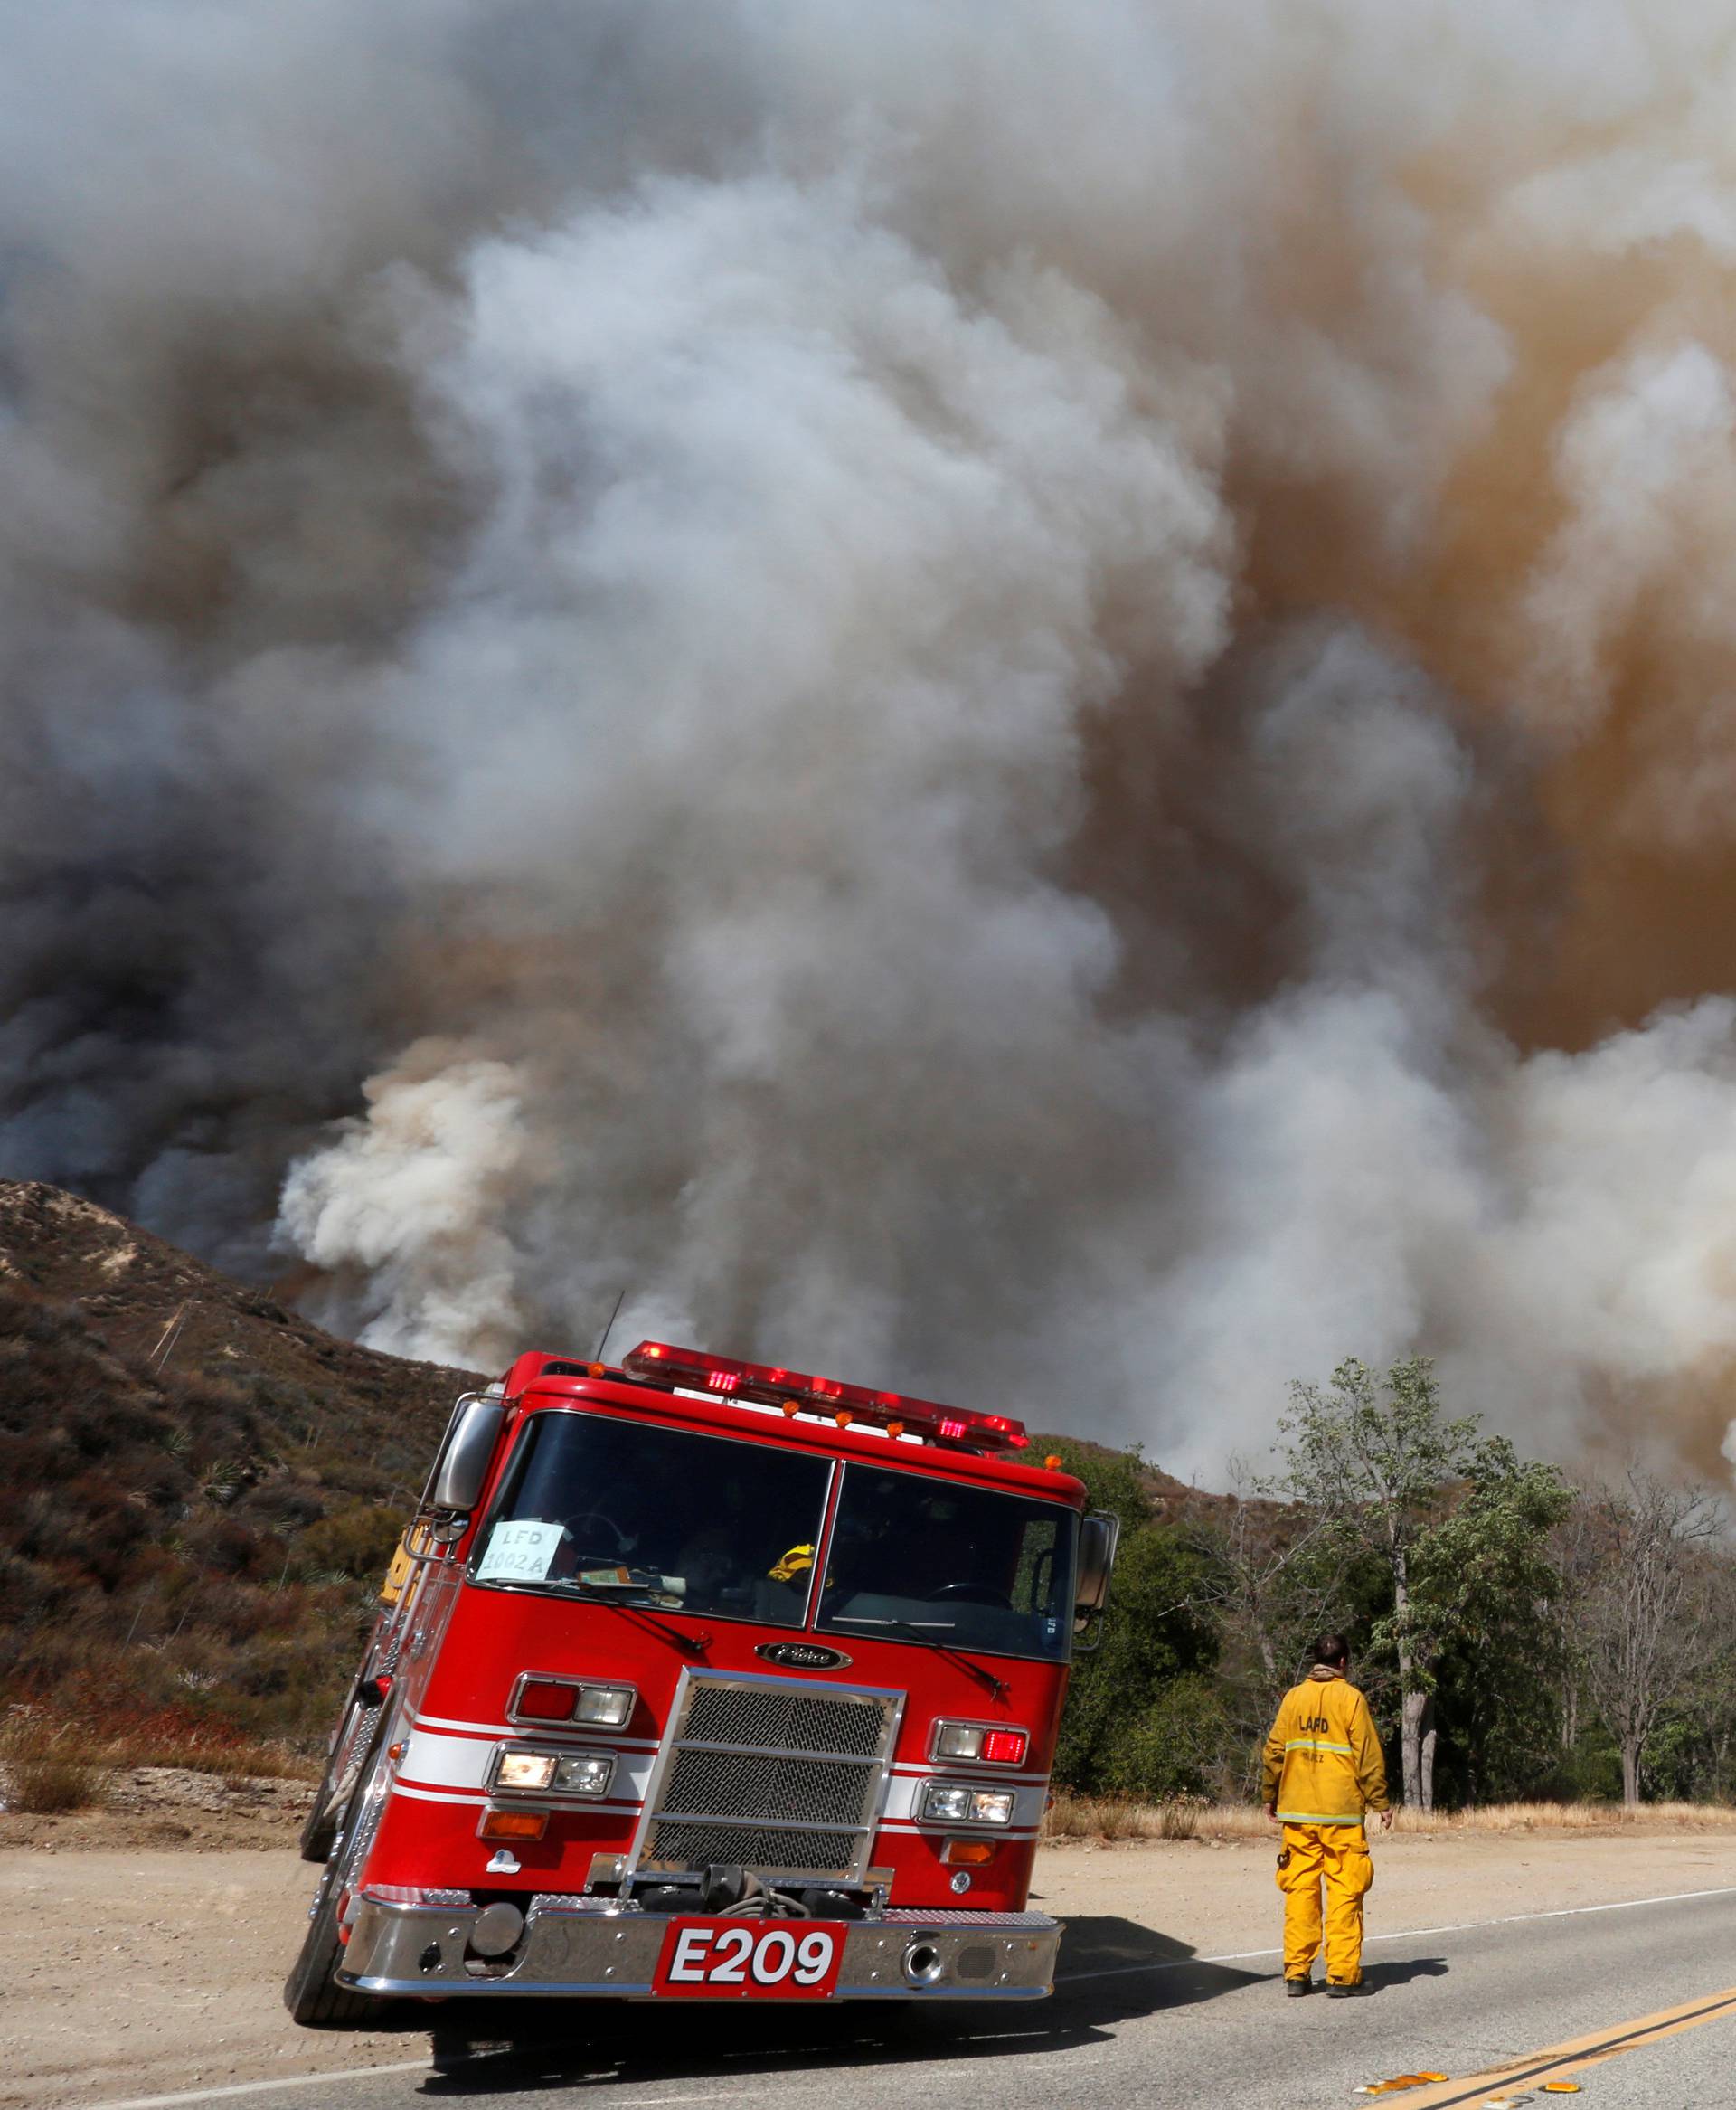 Crews battle the so-called Sand Fire in the Angeles National Forest near Los Angeles, California